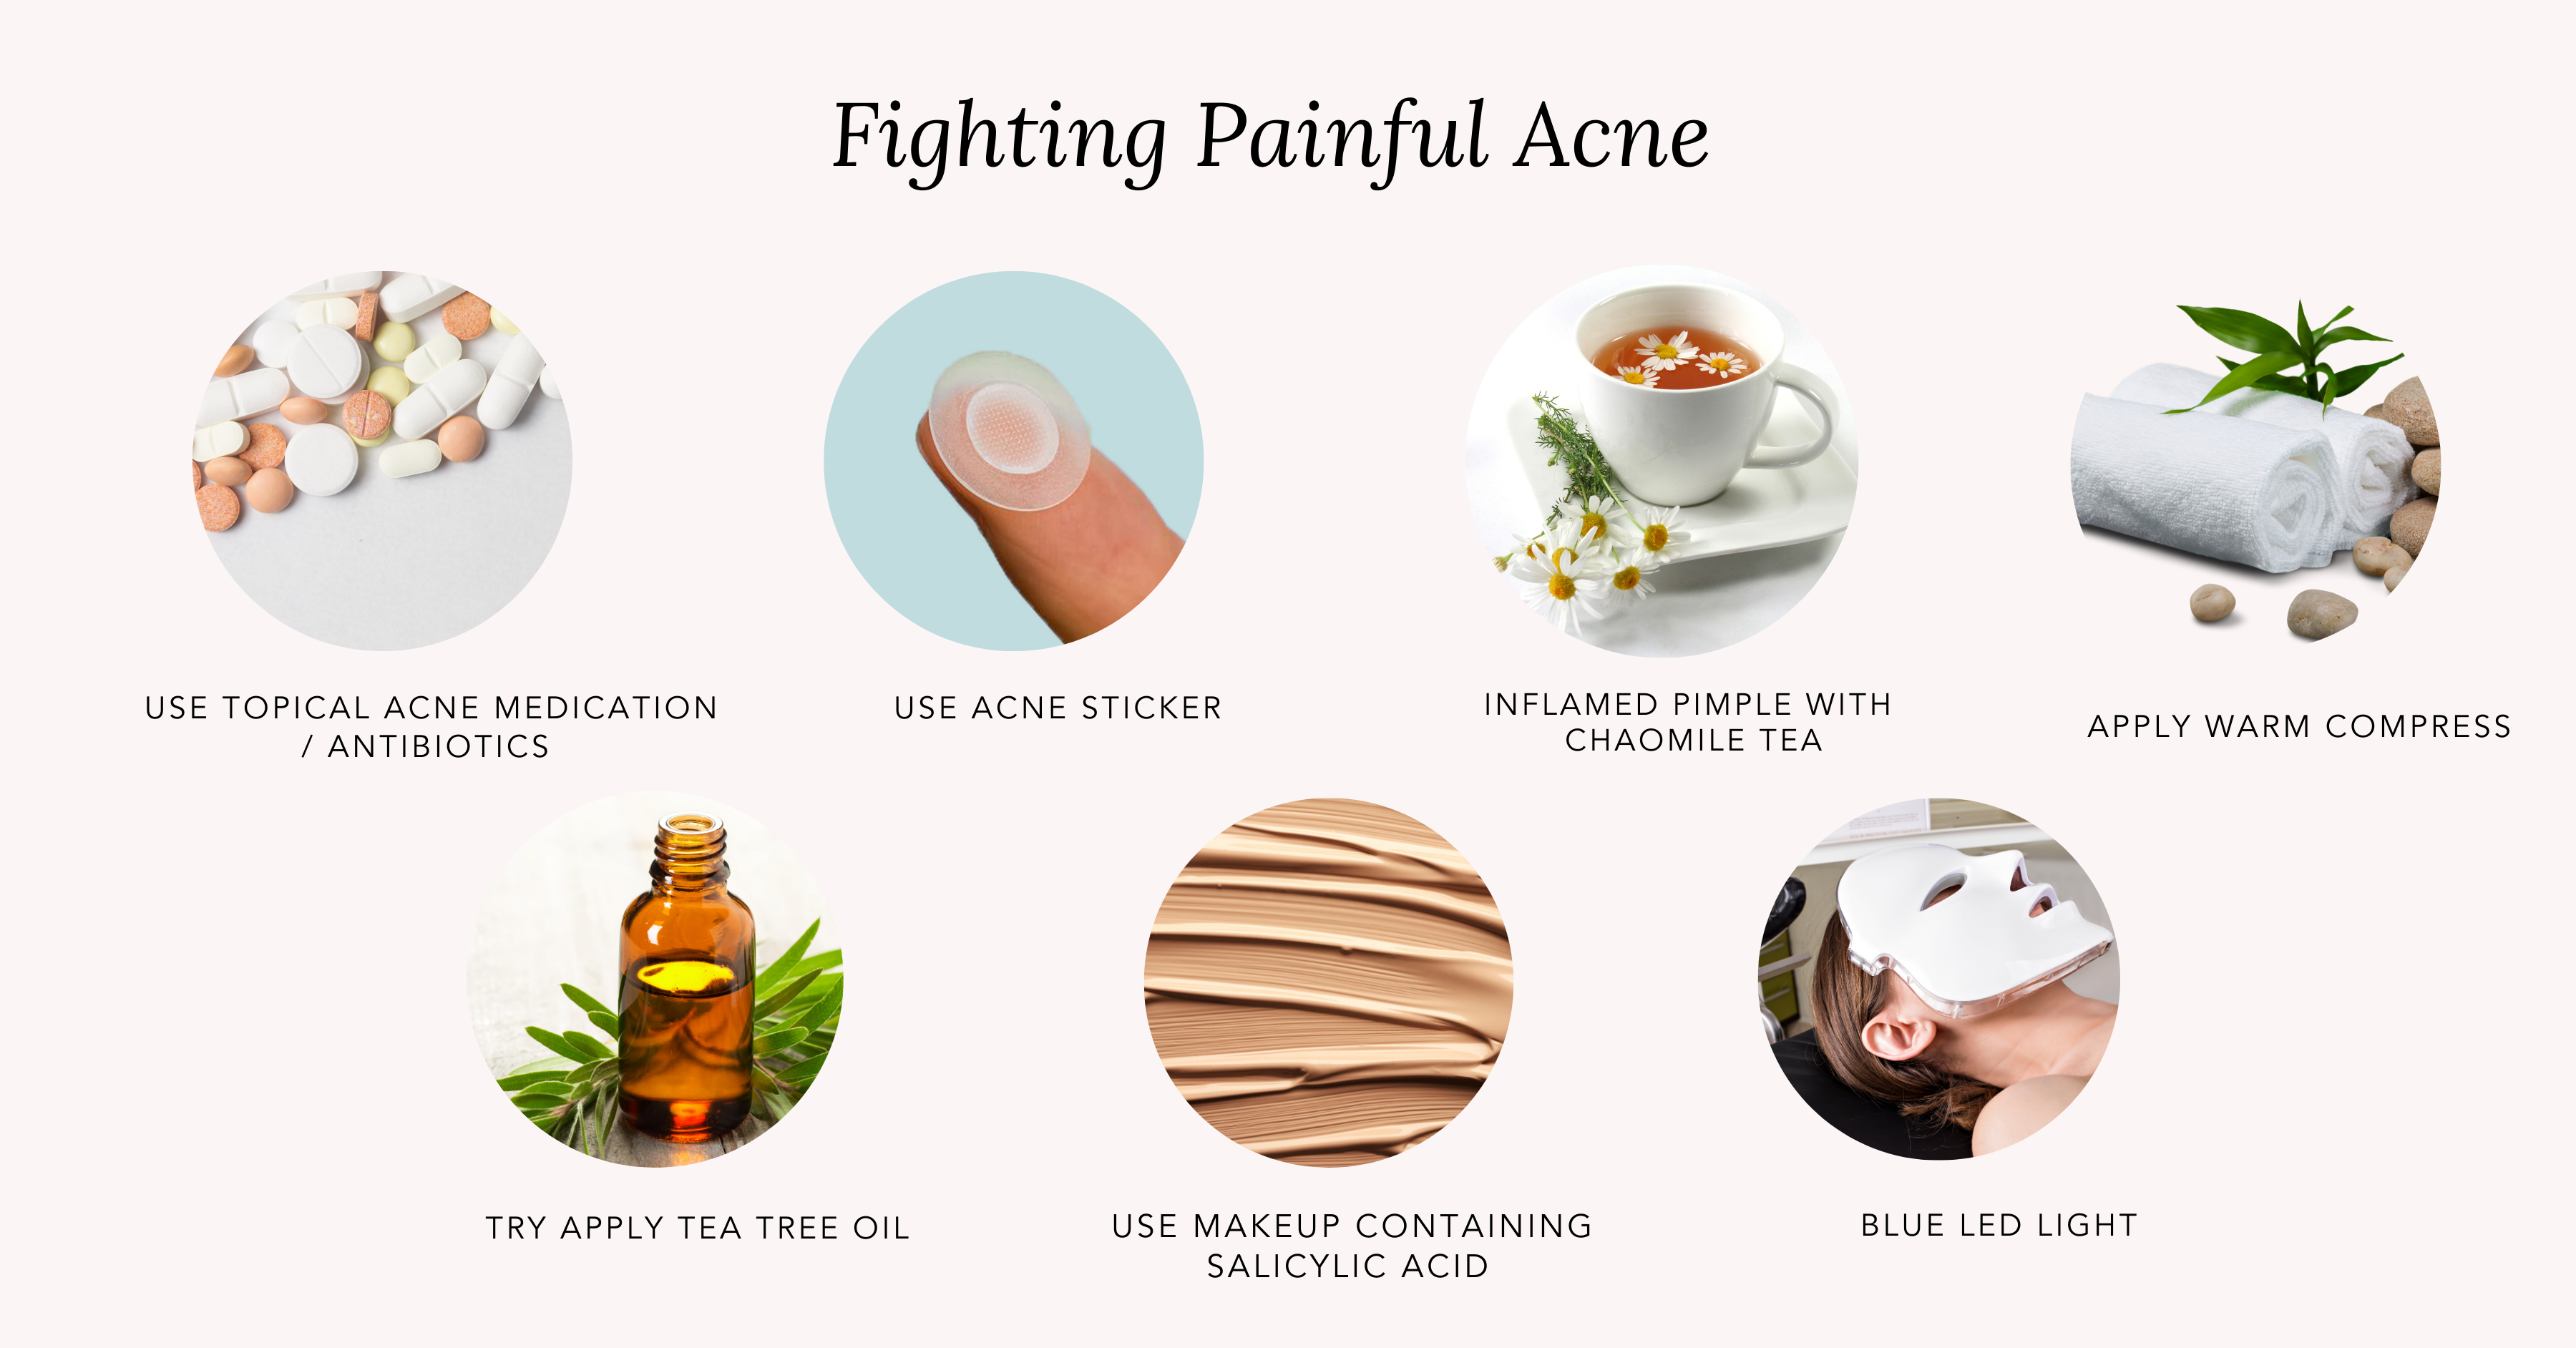 cystic acne hot or cold compress